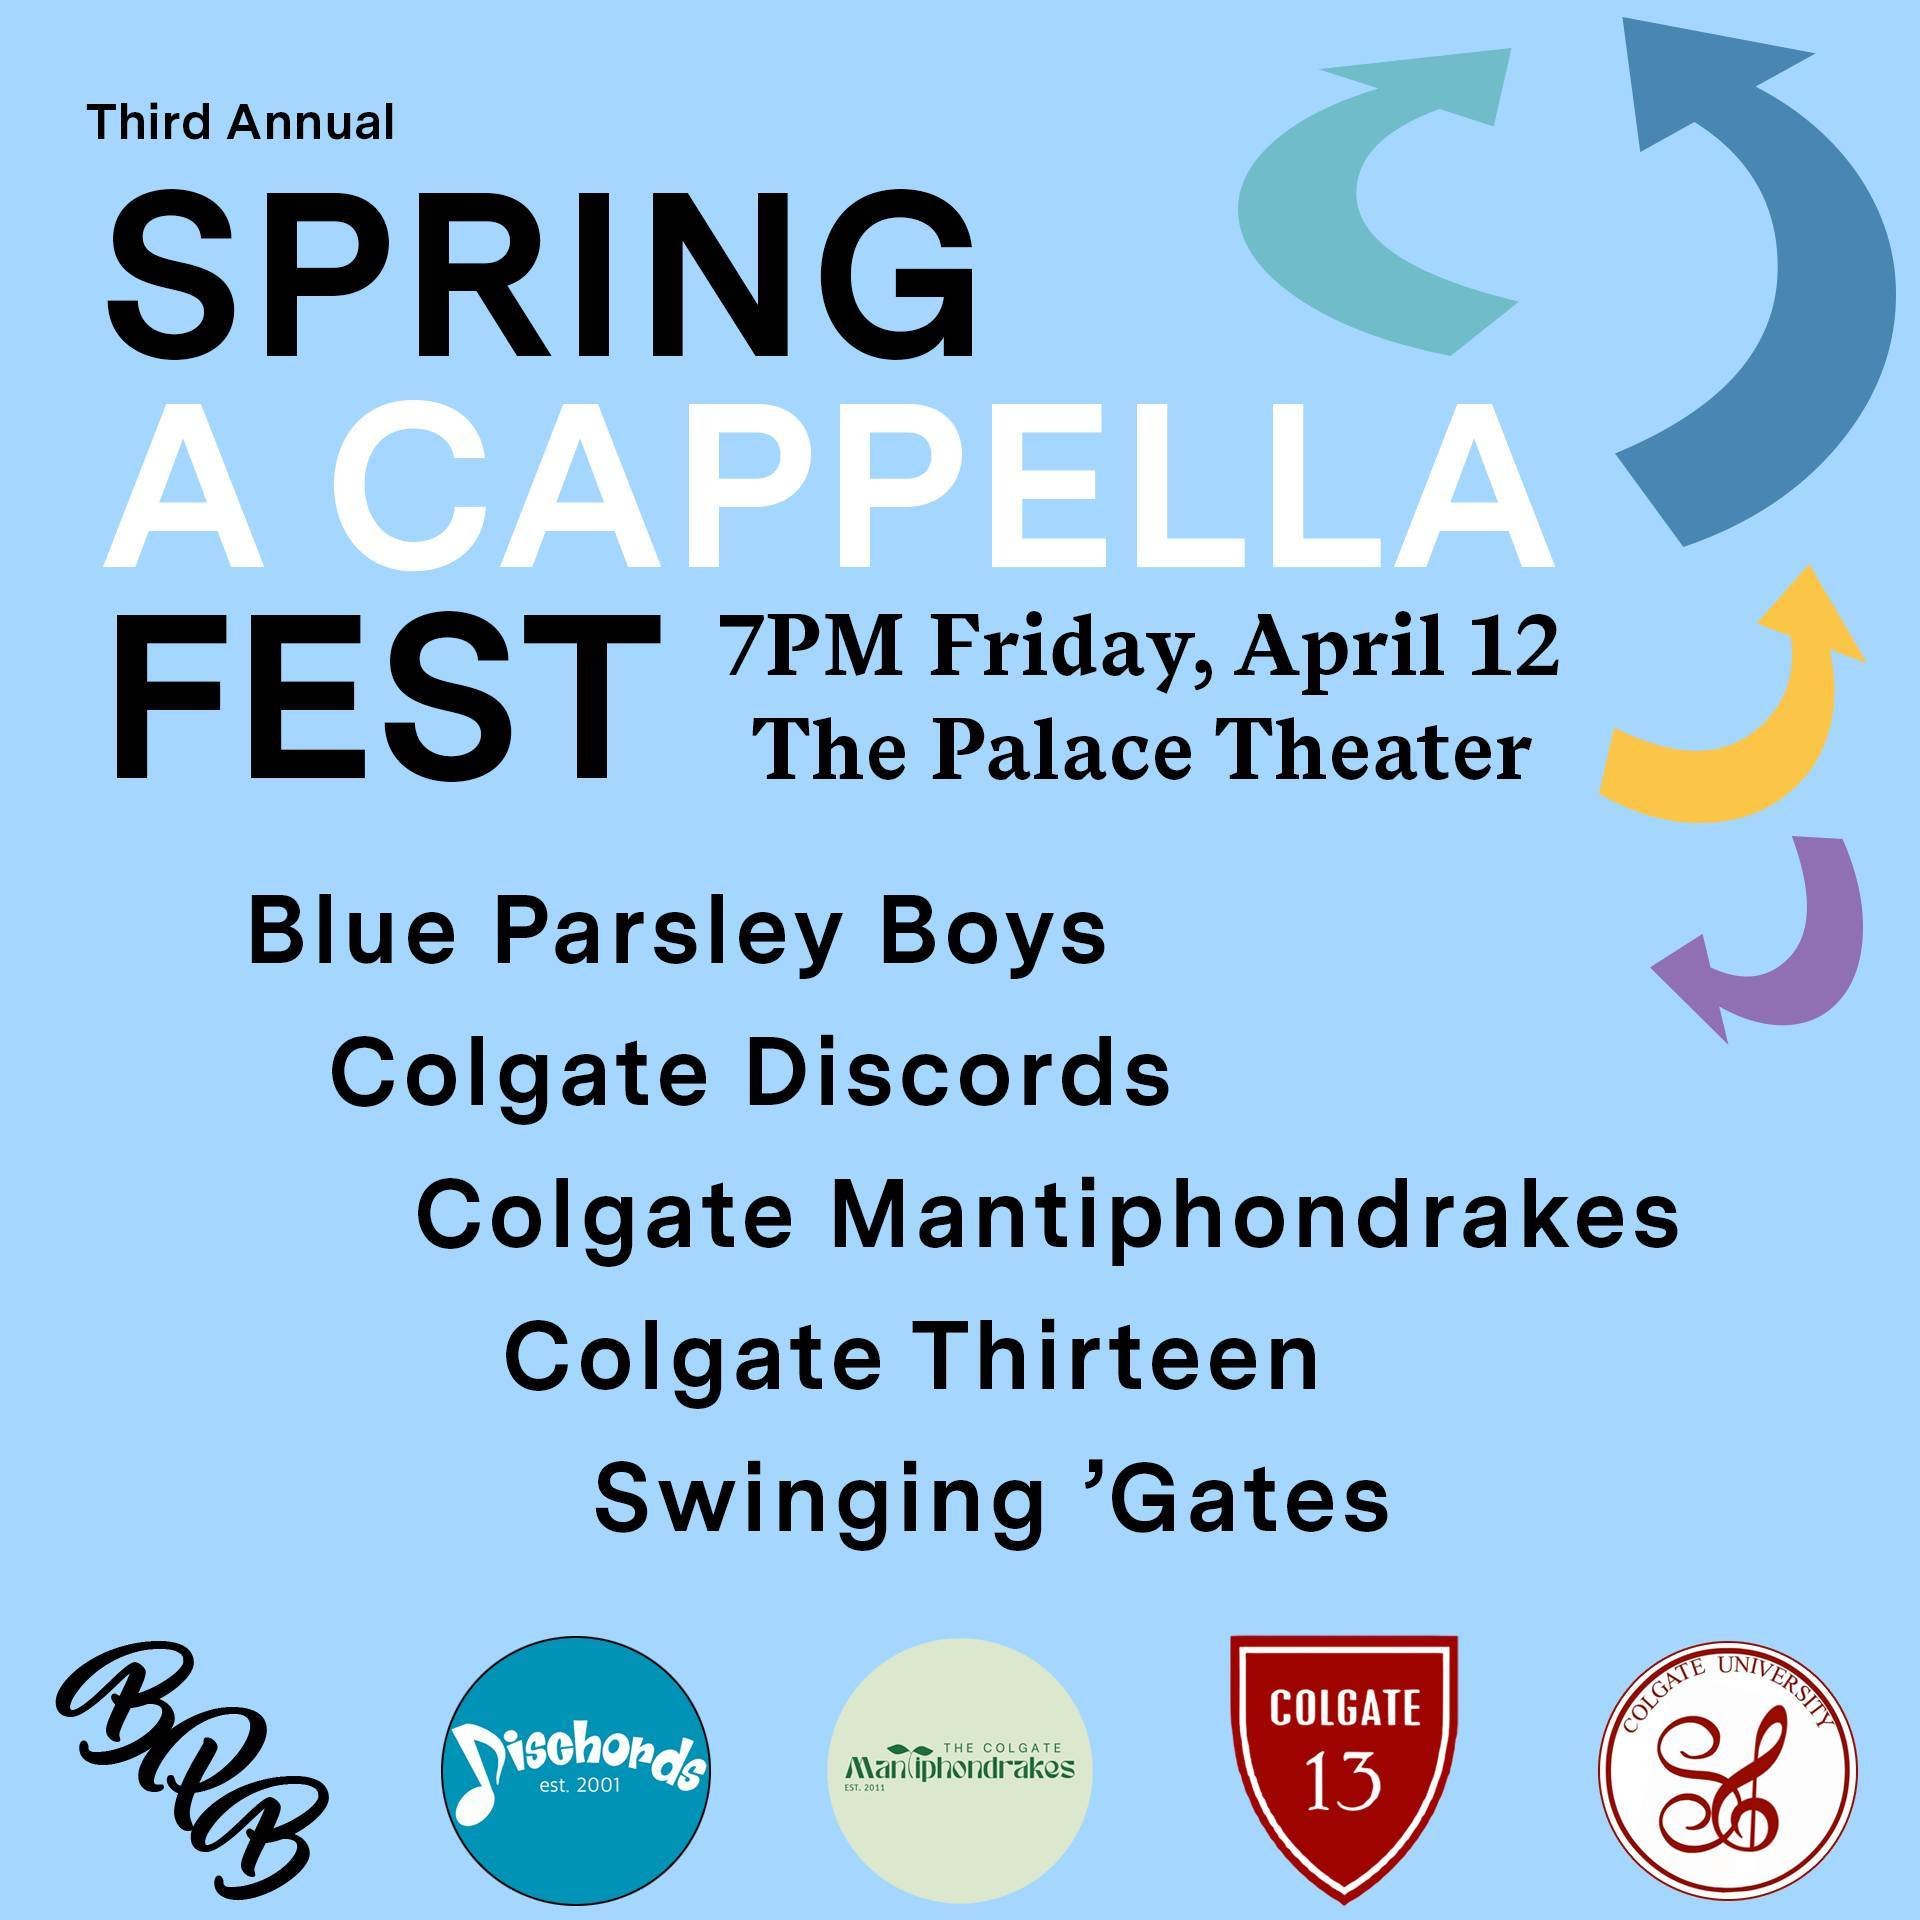 🎶 NEXT WEEK🎶 
Third Annual A cappella Fest!
7️⃣pm Friday, April 1️⃣2️⃣th

You will be blown away by the talent in the room next Friday:
🎤Blue Parsley Boys
🎤Colgate Discords
🎤Colgate Mantiphondrakes
🎤Colgate Thirteen
🎤Swinging 'Gates

@thisisha